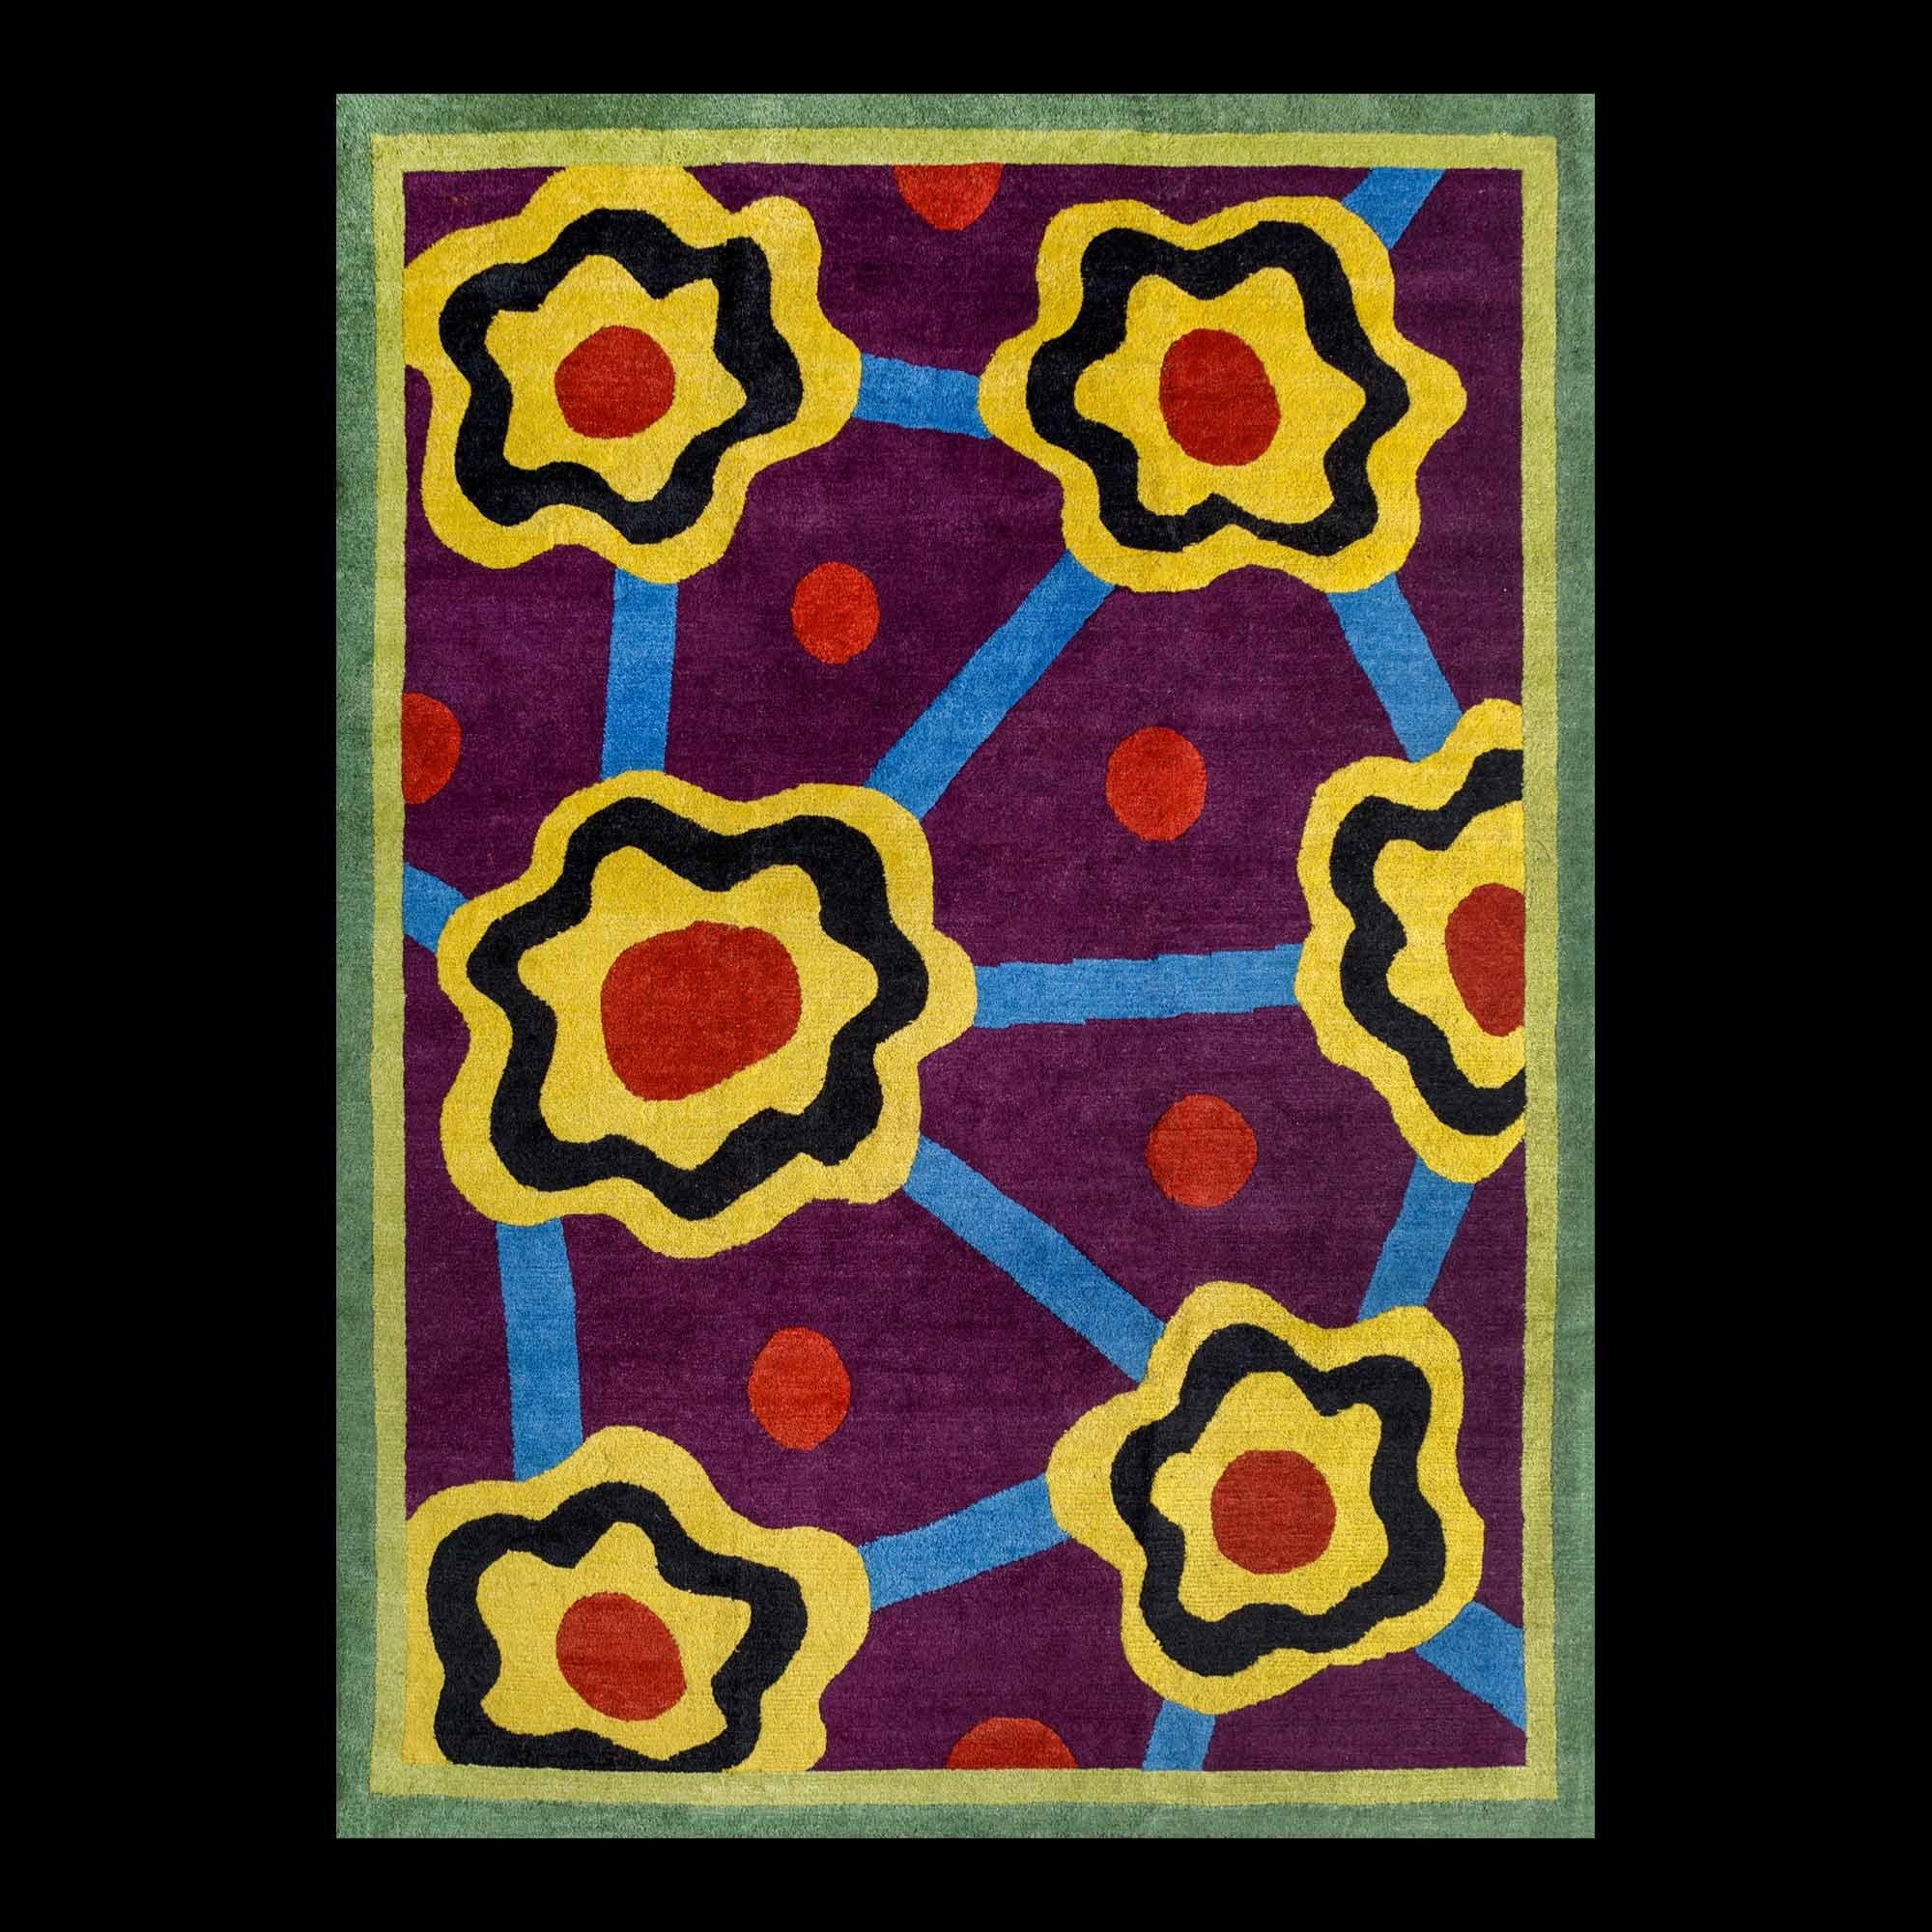 NDP53 woollen carpet by Nathalie Du Pasquier for Post Design collection/Memphis

A woollen carpet handcrafted by different Nepalese artisans. Made in a limited edition of 36 signed, numbered examples.

As the carpet is made by hand, there are